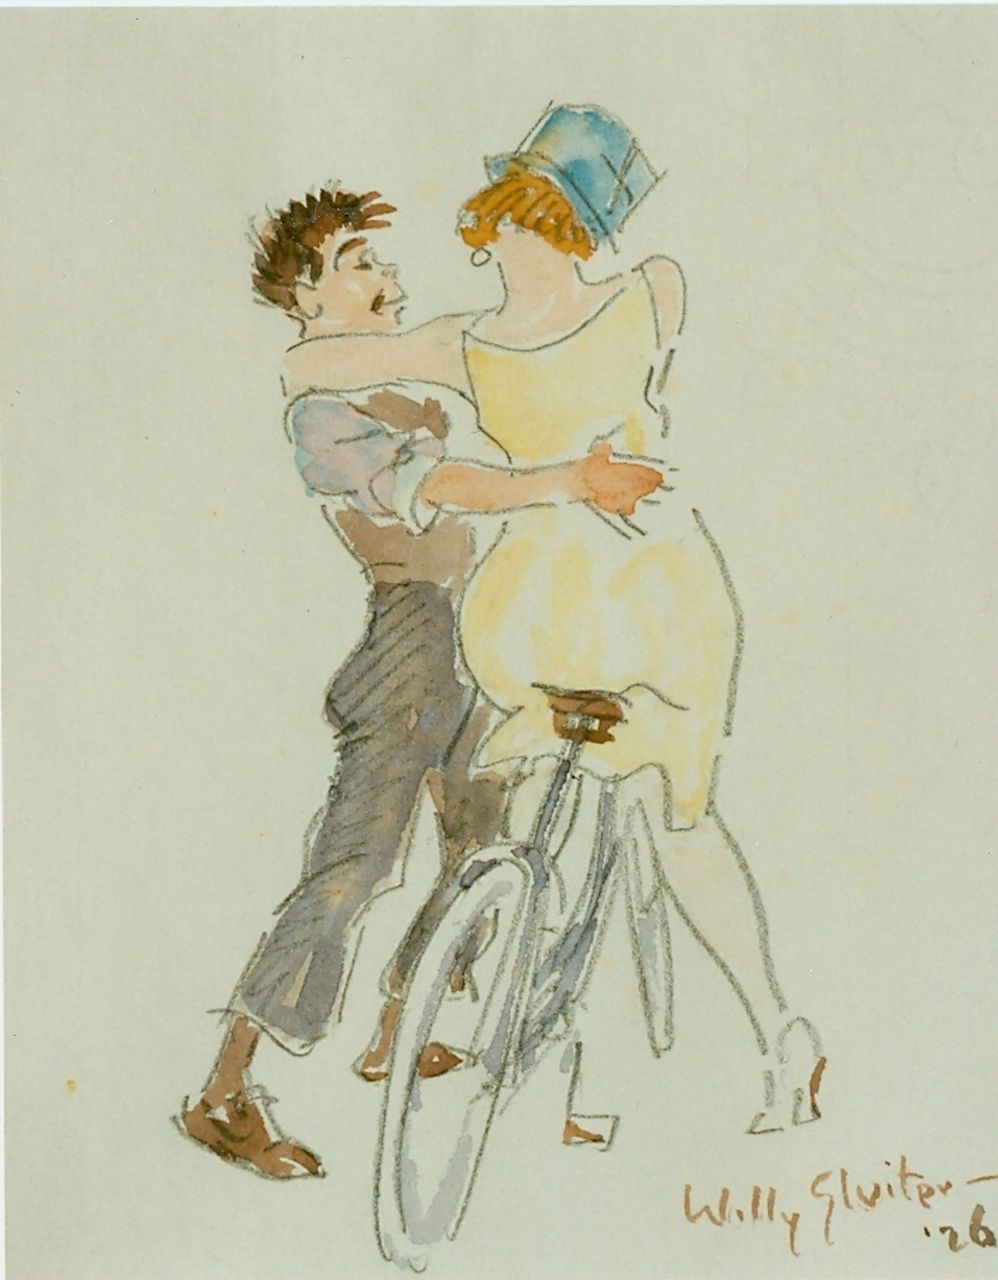 Sluiter J.W.  | Jan Willem 'Willy' Sluiter, Go for a ride, watercolour on paper 19.0 x 16.5 cm, signed l.r. and dated '26